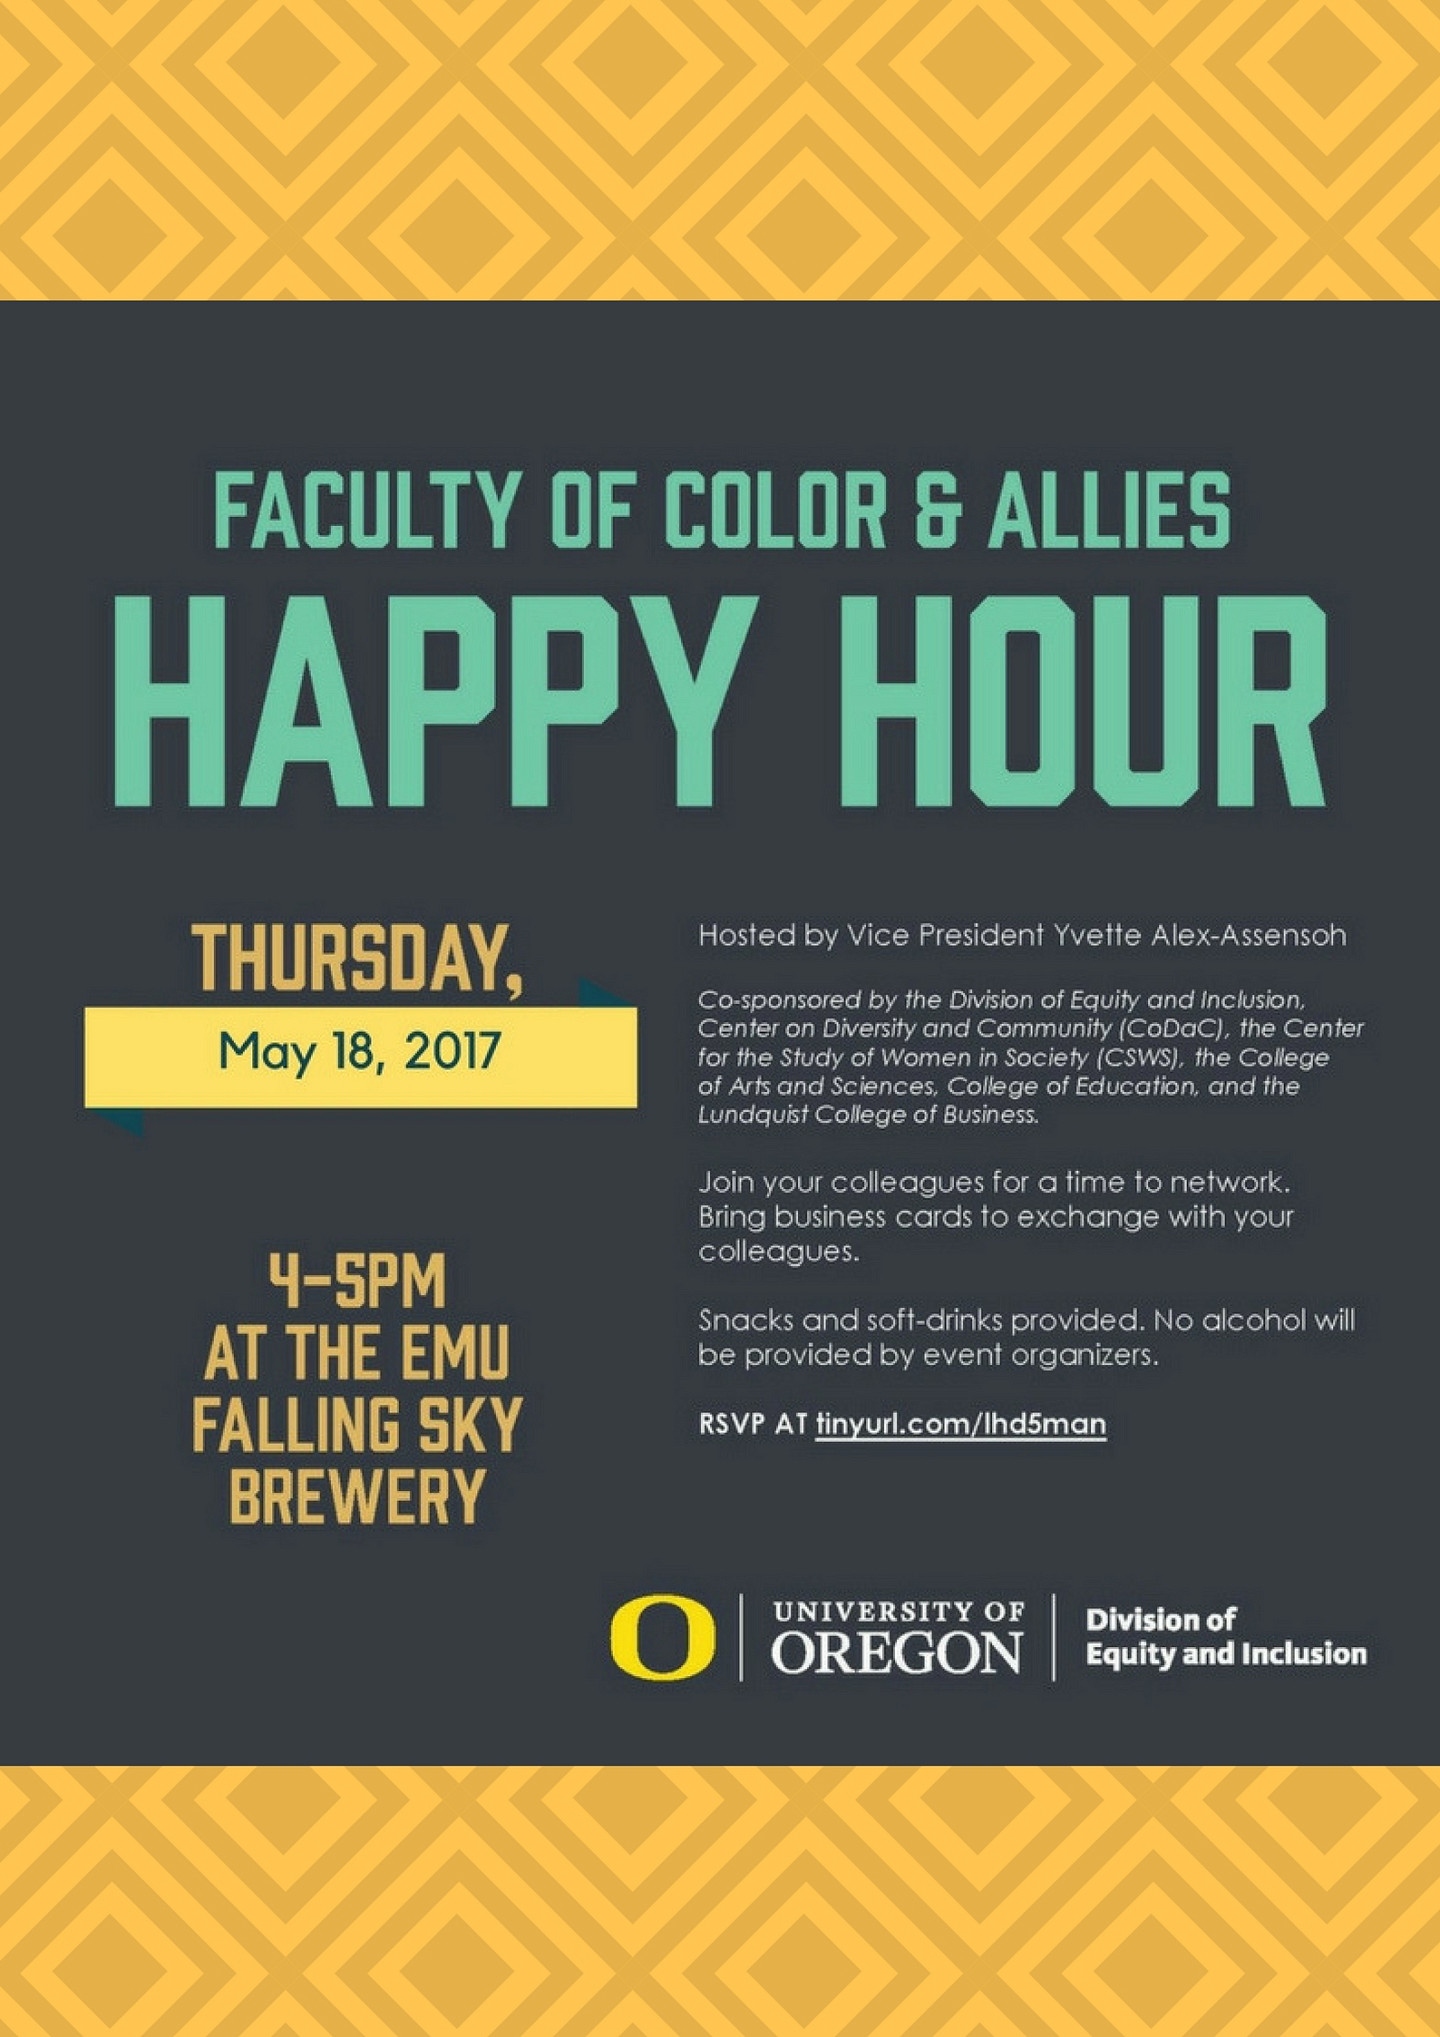 Faculty of Color Happy Hour, May 18, 4 - 5 PM, EMU Falling Sky Brewery